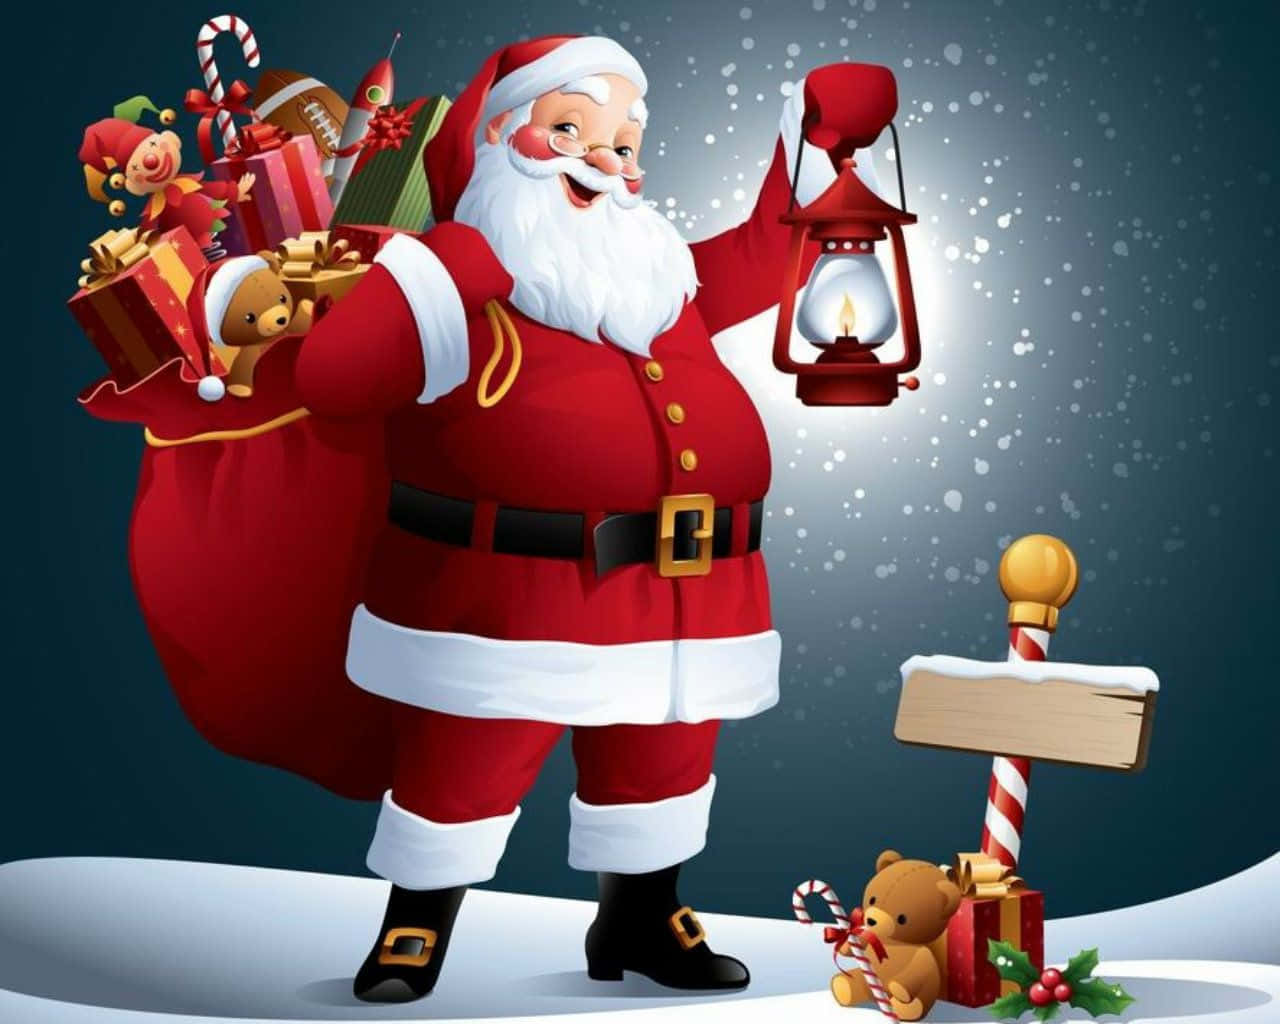 Santa Claus is here! Getting ready to give Christmas gifts to all good children. Wallpaper